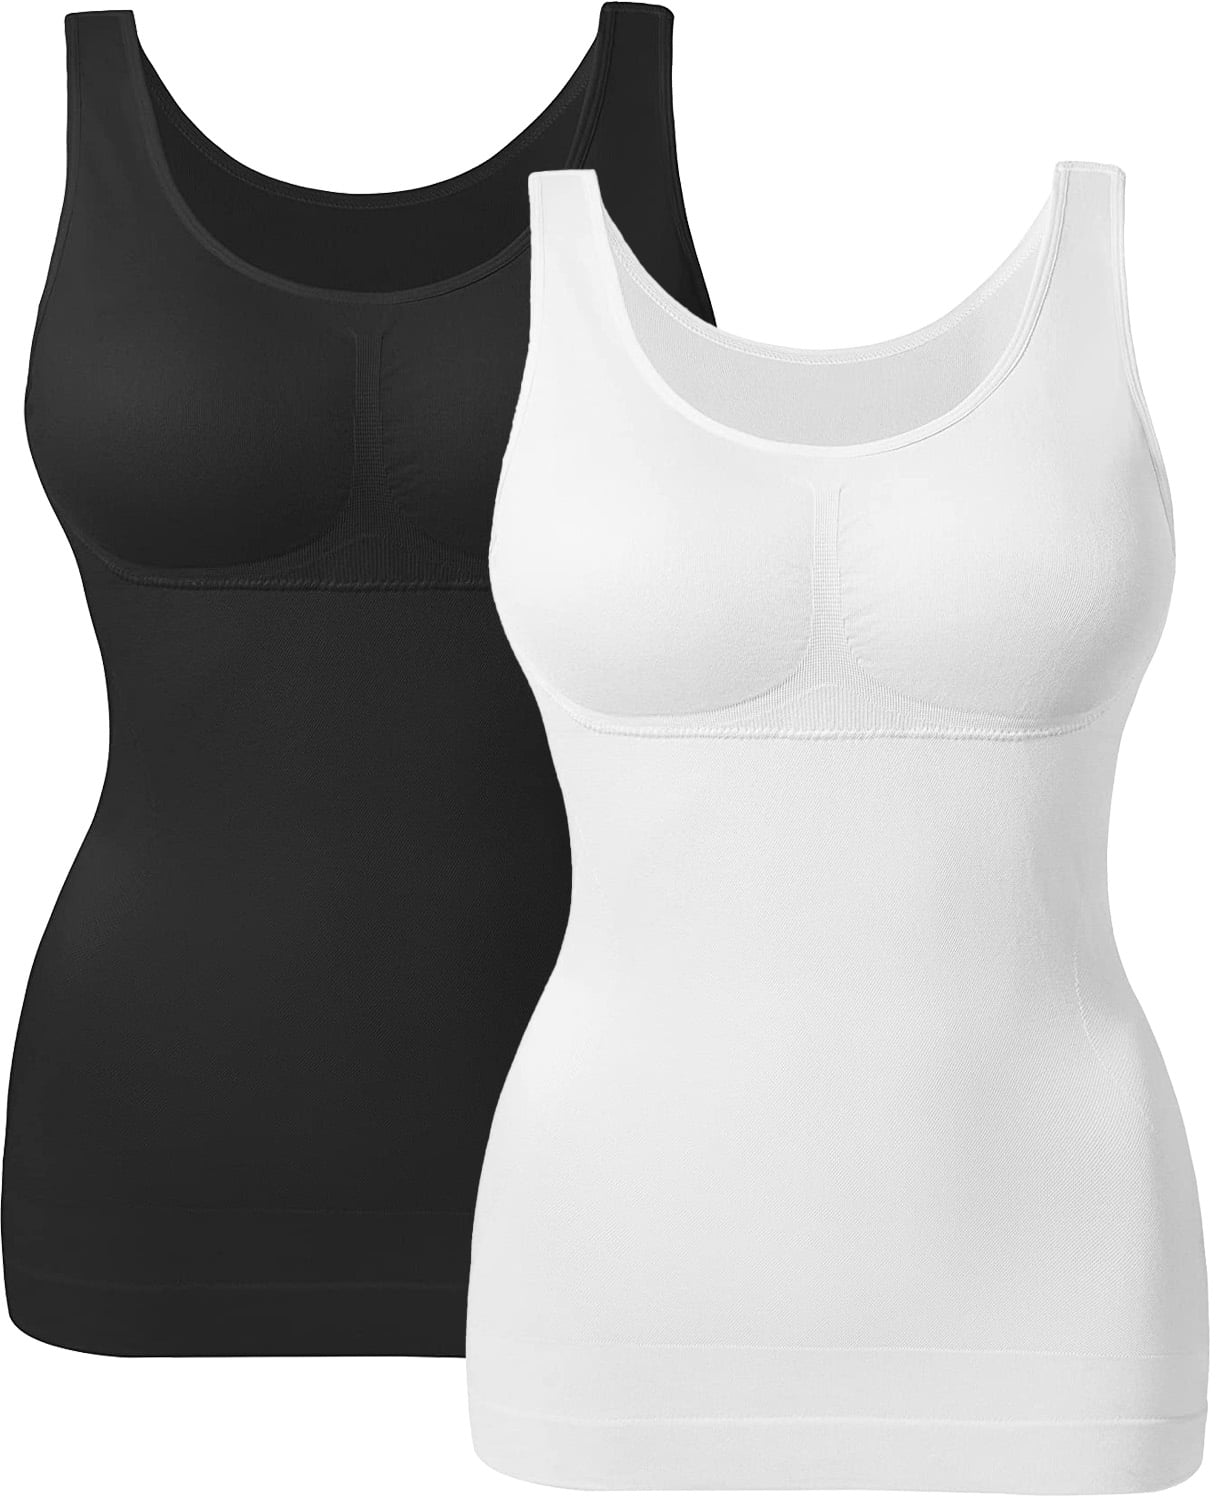 MANIFIQUE Women's Slimming Tank Top with Built in Bras, Everyday Shapewear,  White Compression Body Tank